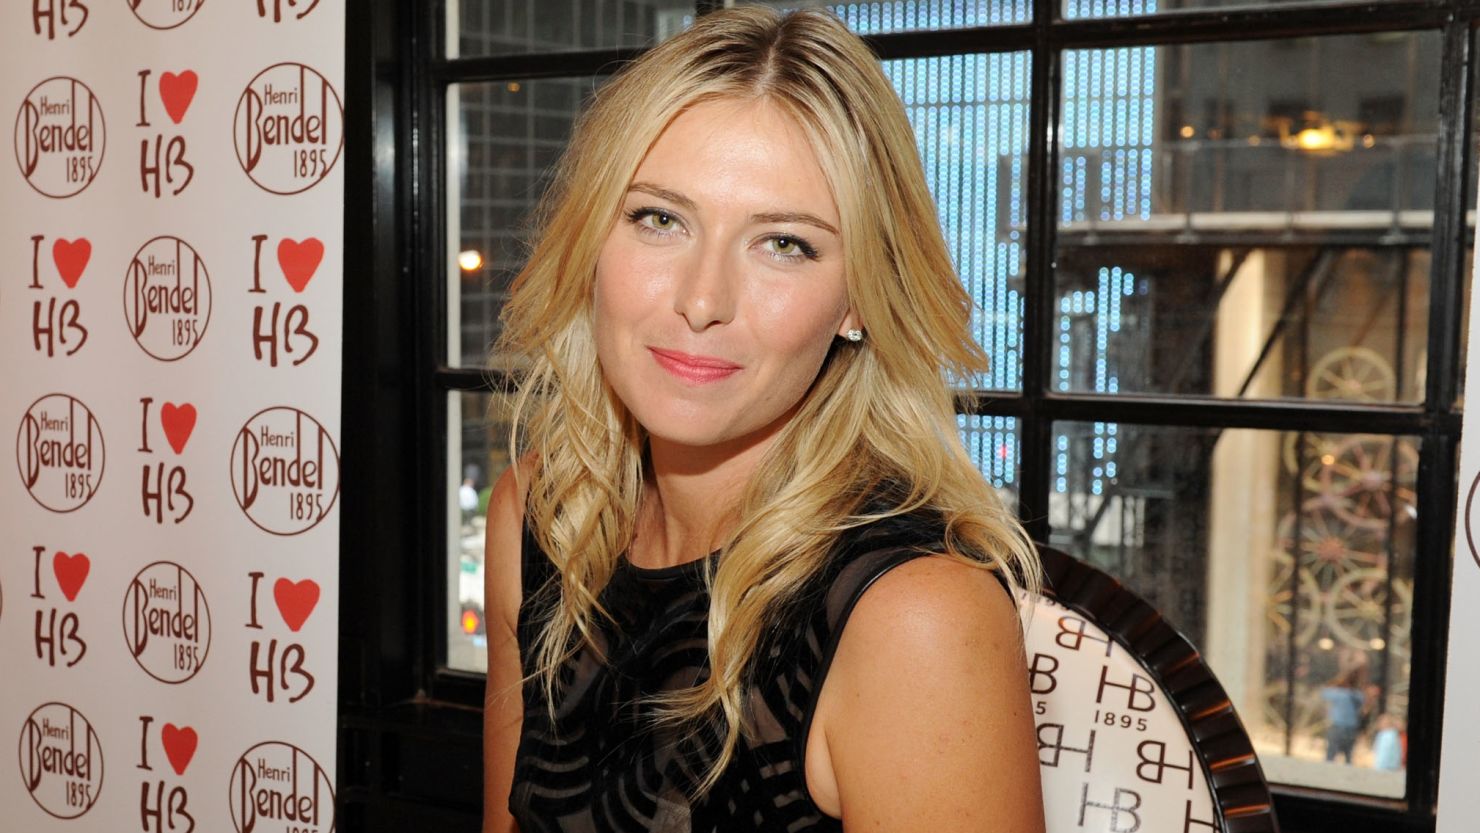 World No. 3 Maria Sharapova was promoting her range of candy in New York ahead of the tournament.